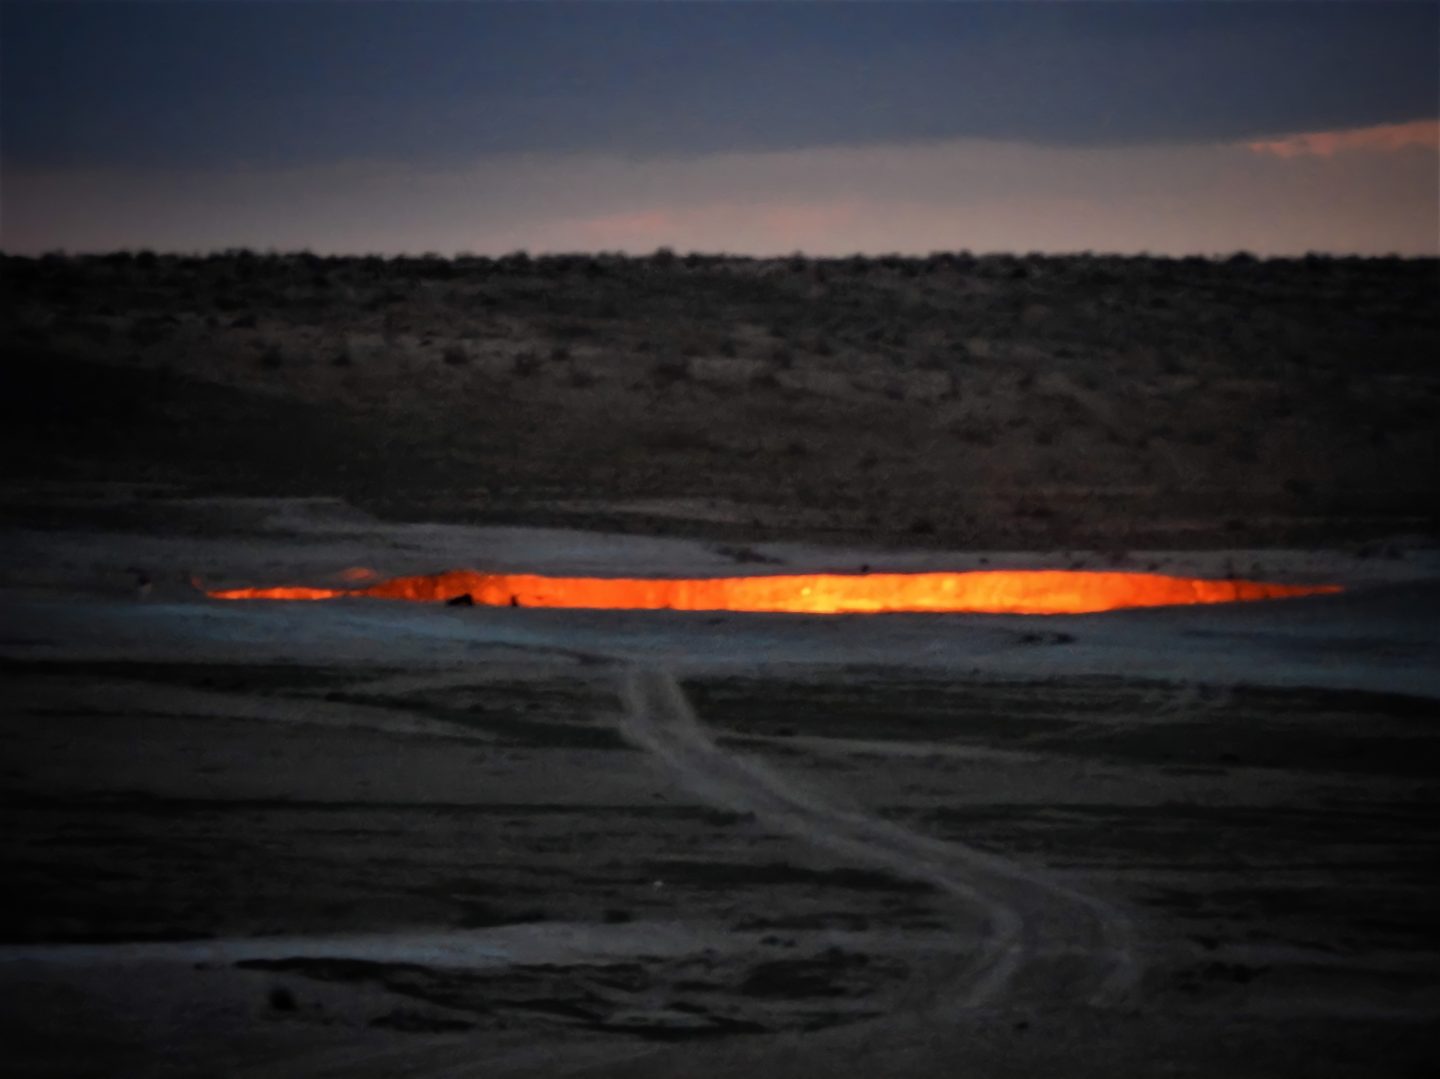 Darvaza Gas Crater (The Door To Hell) at night